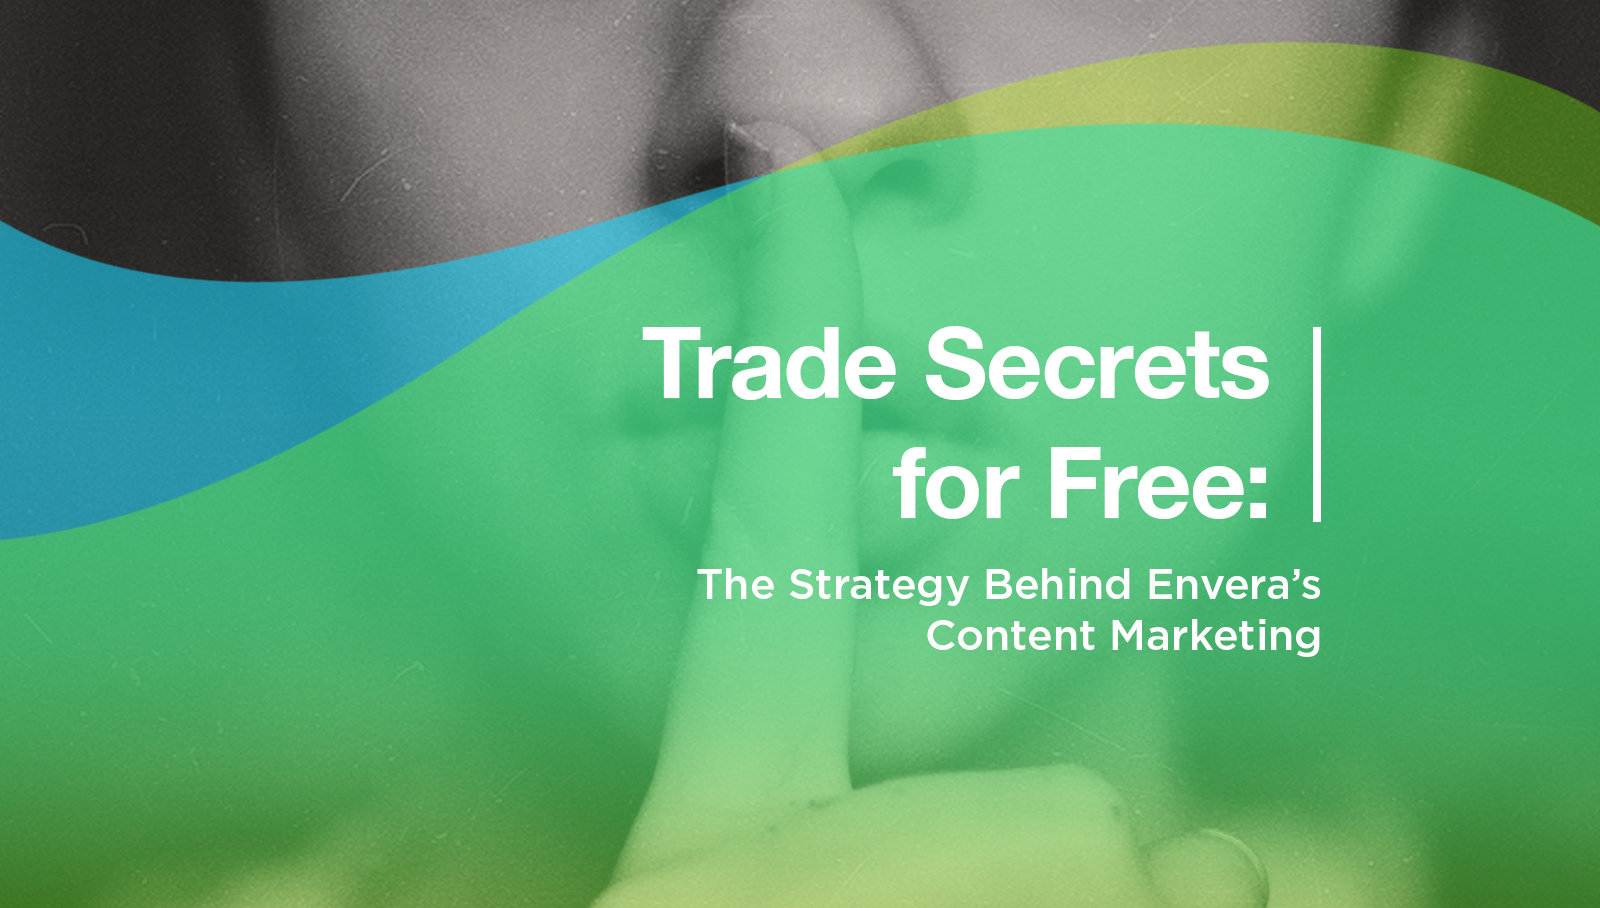 Trade Secrets for Free: The Strategy Behind Envera’s Content Marketing